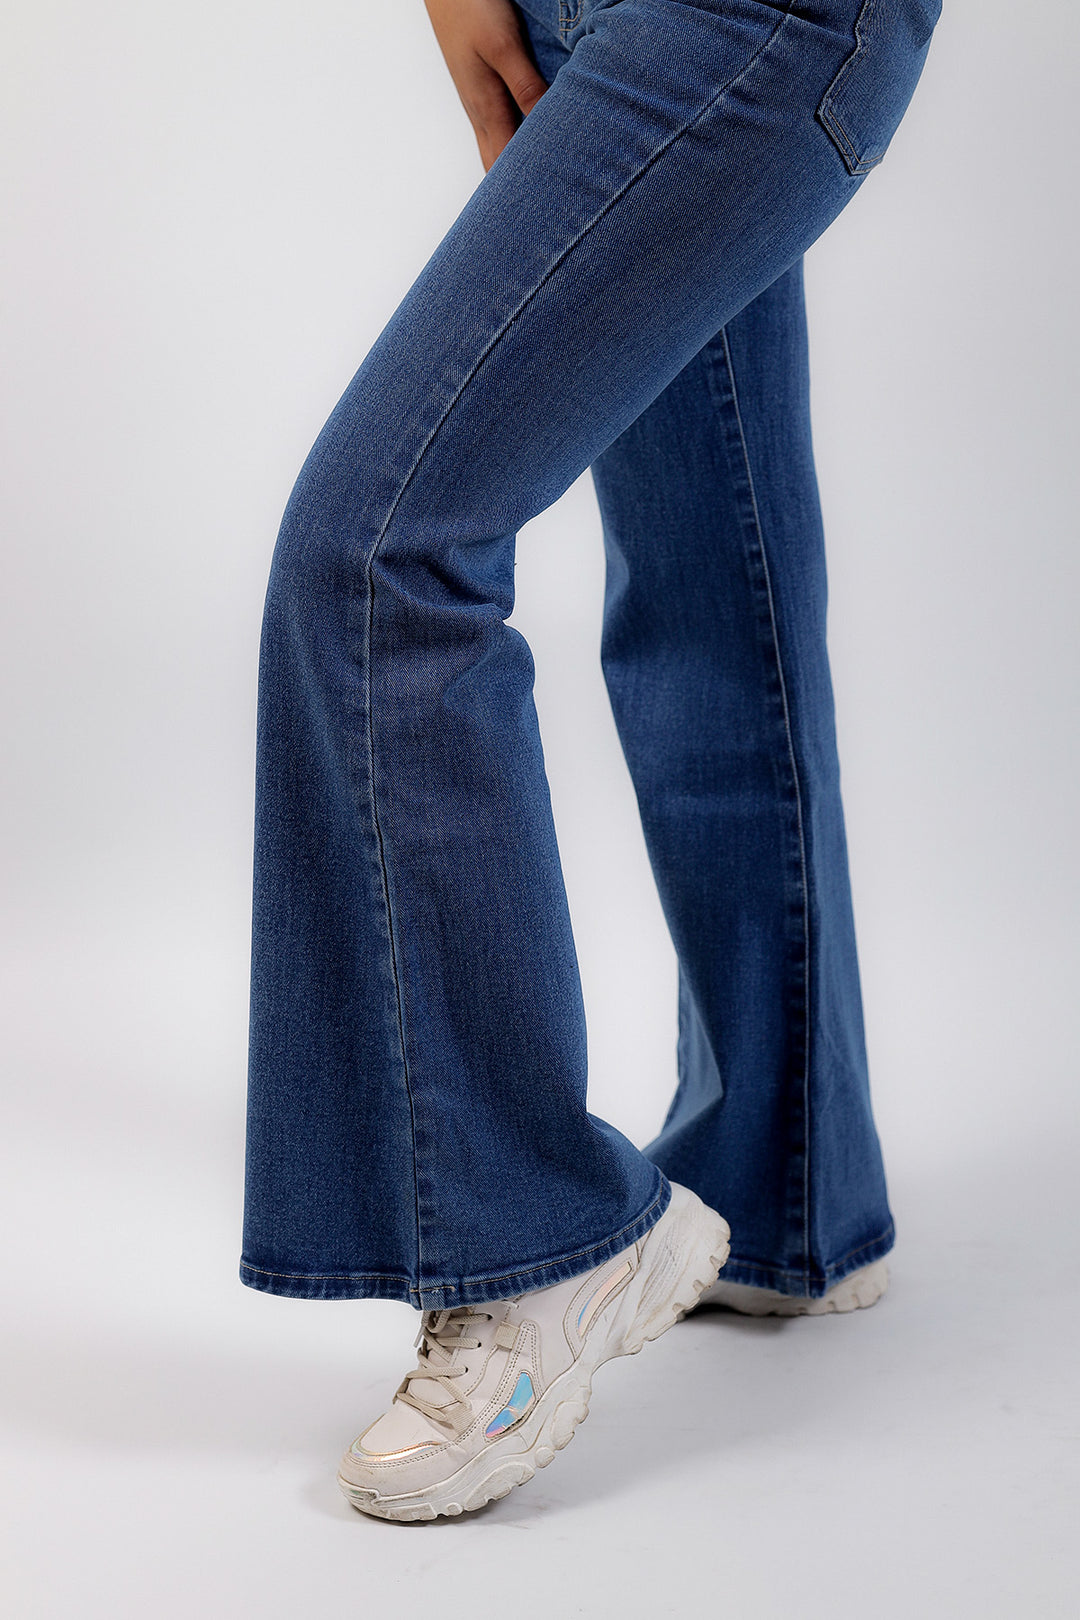 Whisker Washed Boot Cut Jeans in Aqua Blue for Women